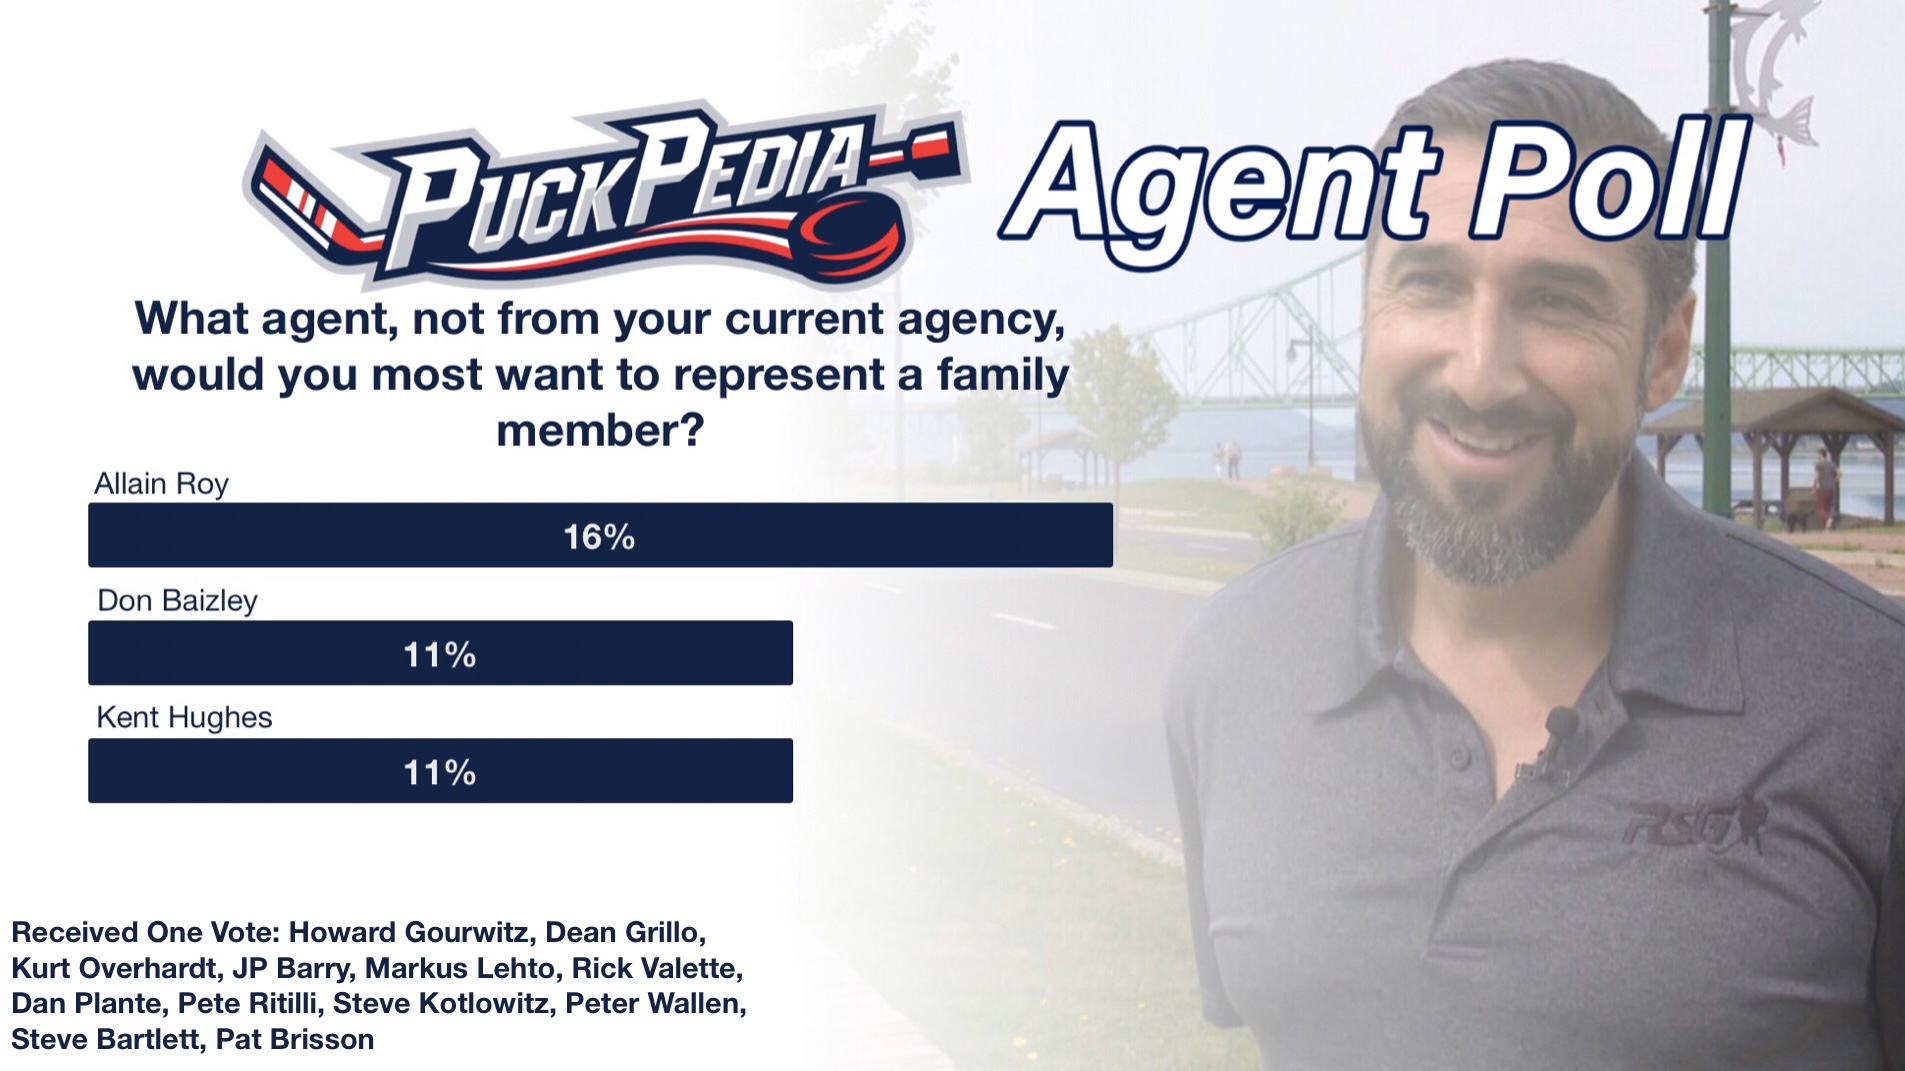 What agent would you most want to represent a family member?